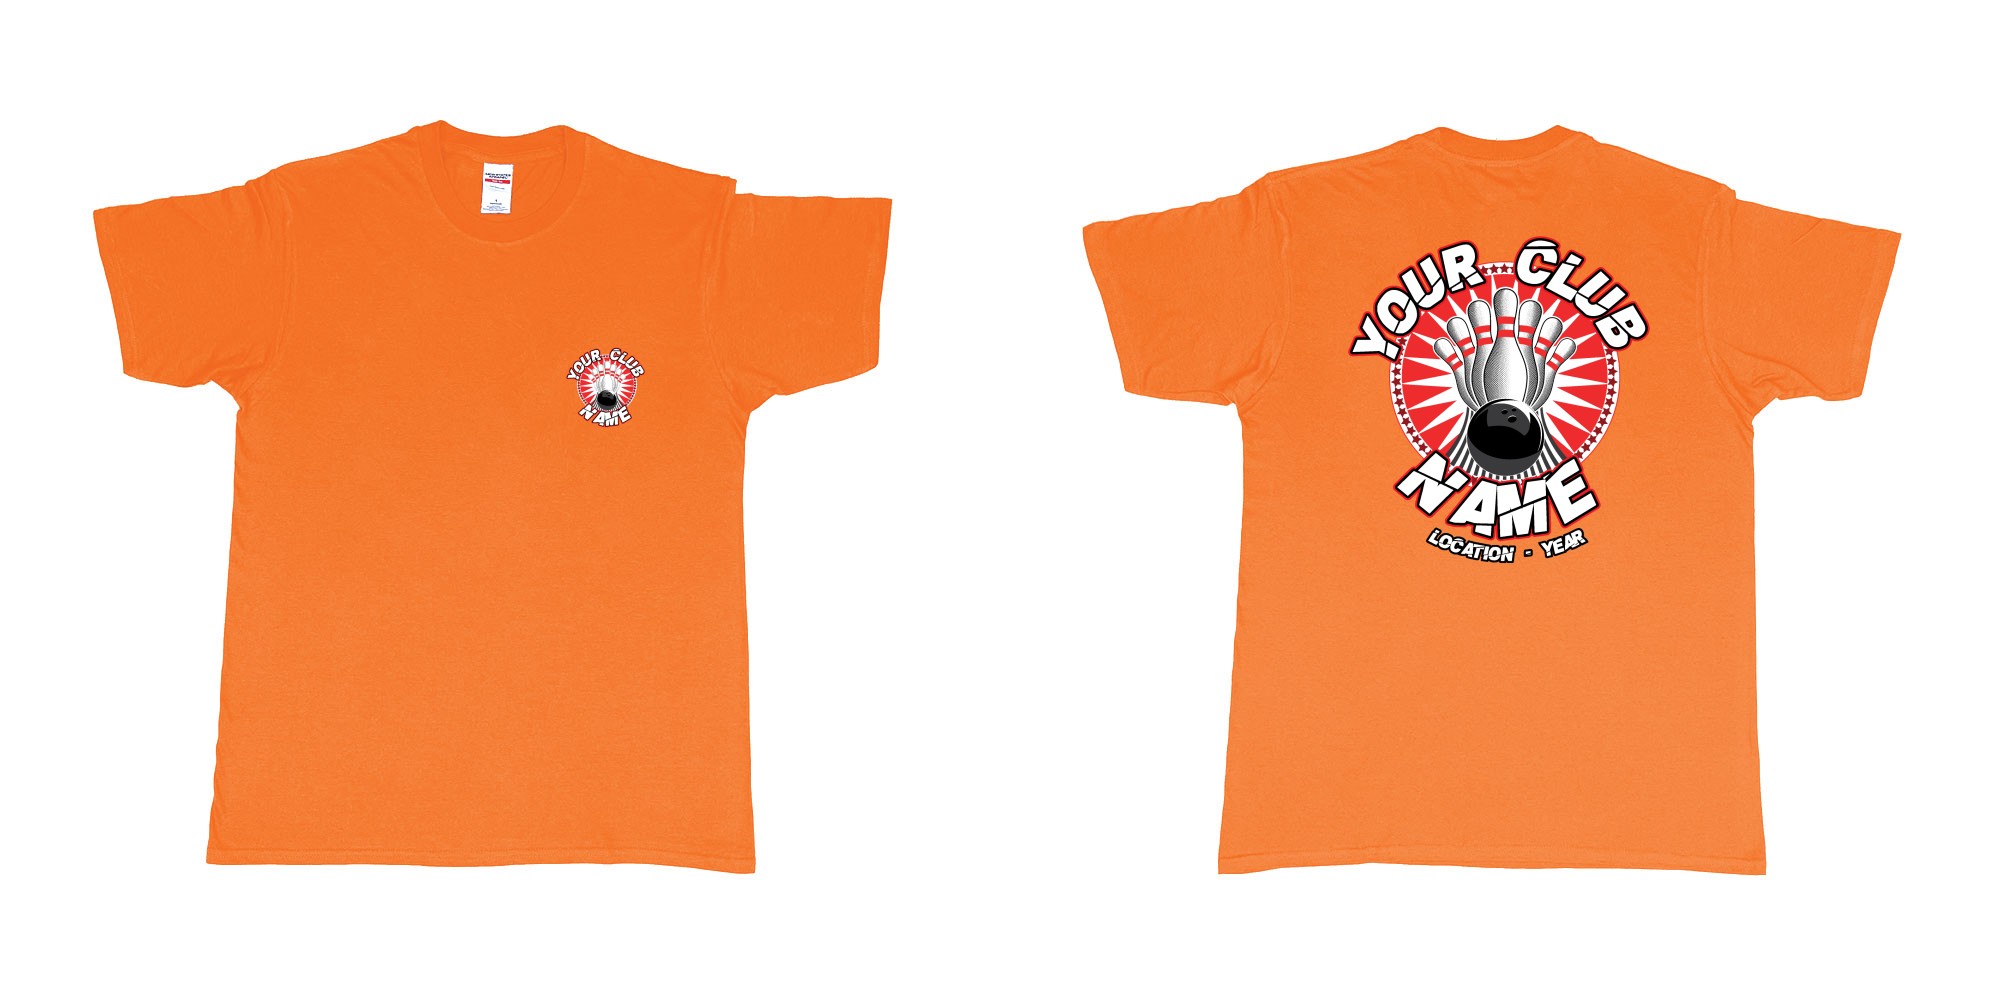 Custom tshirt design TPW strike bowling in fabric color orange choice your own text made in Bali by The Pirate Way